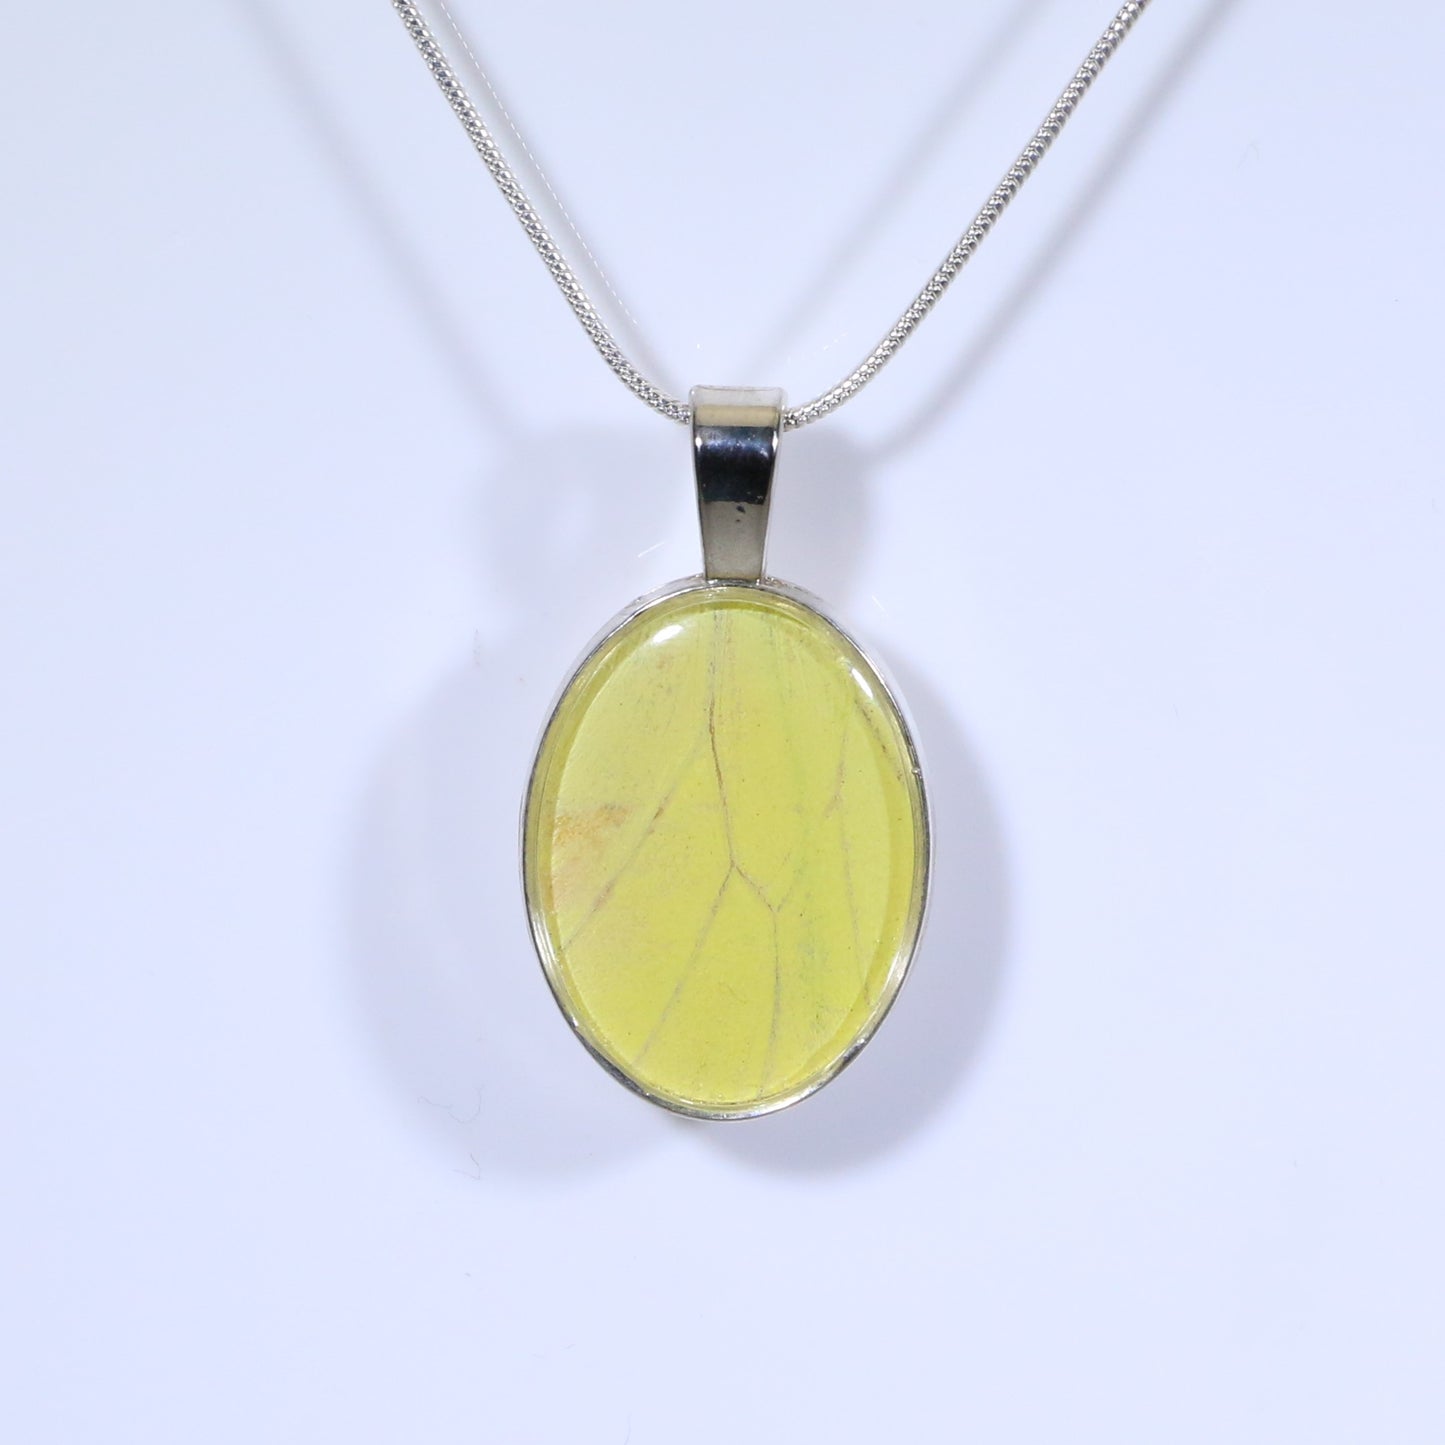 52316 - Real Butterfly Wing Jewelry - Pendant - Large Bale - Oval - Hebomia - Yellow